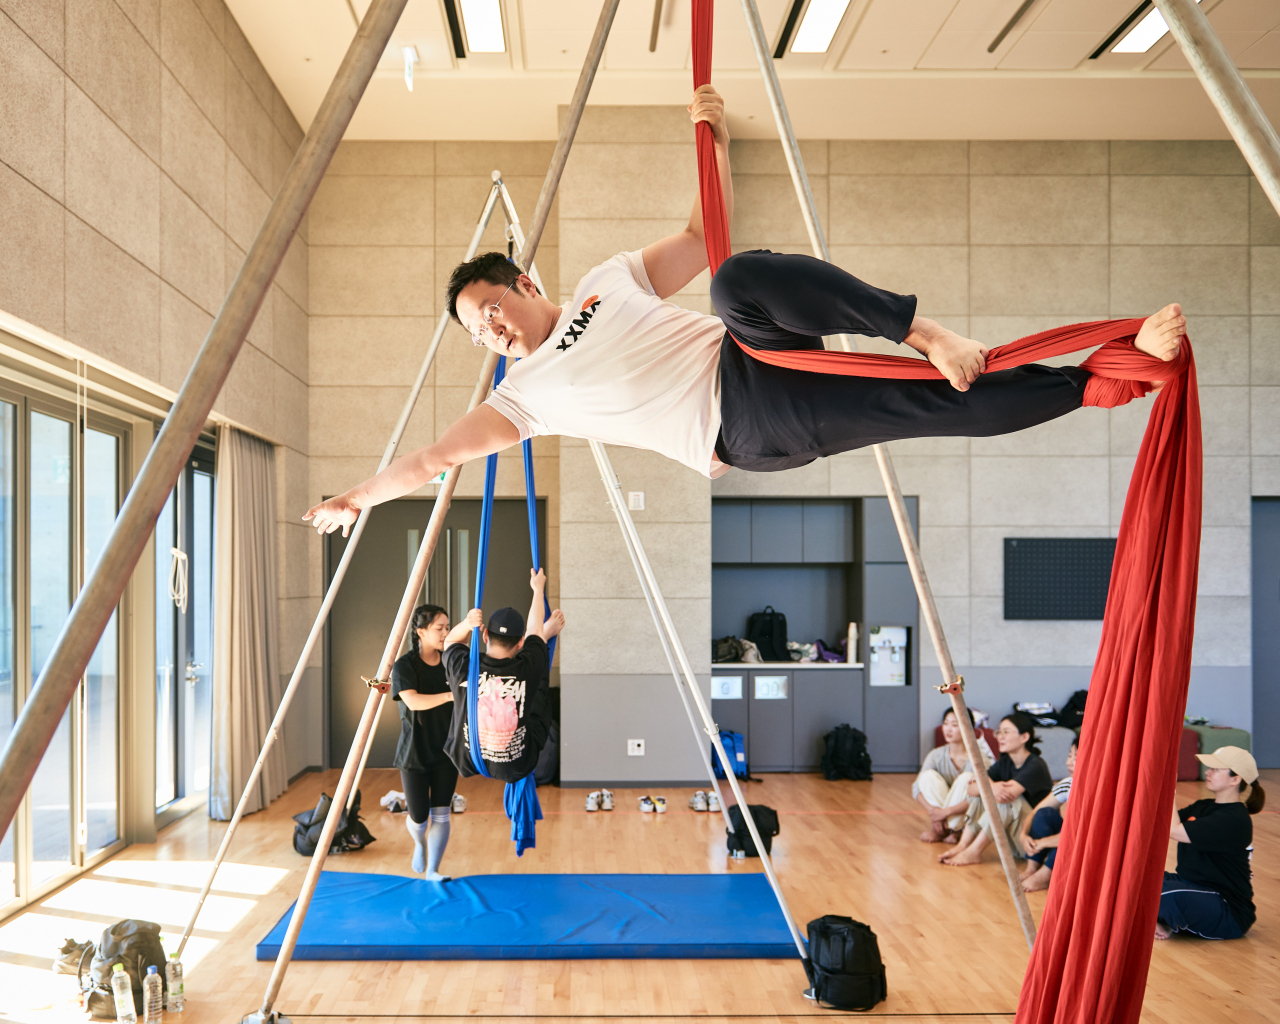 Participants try out aerial silk performing during a 